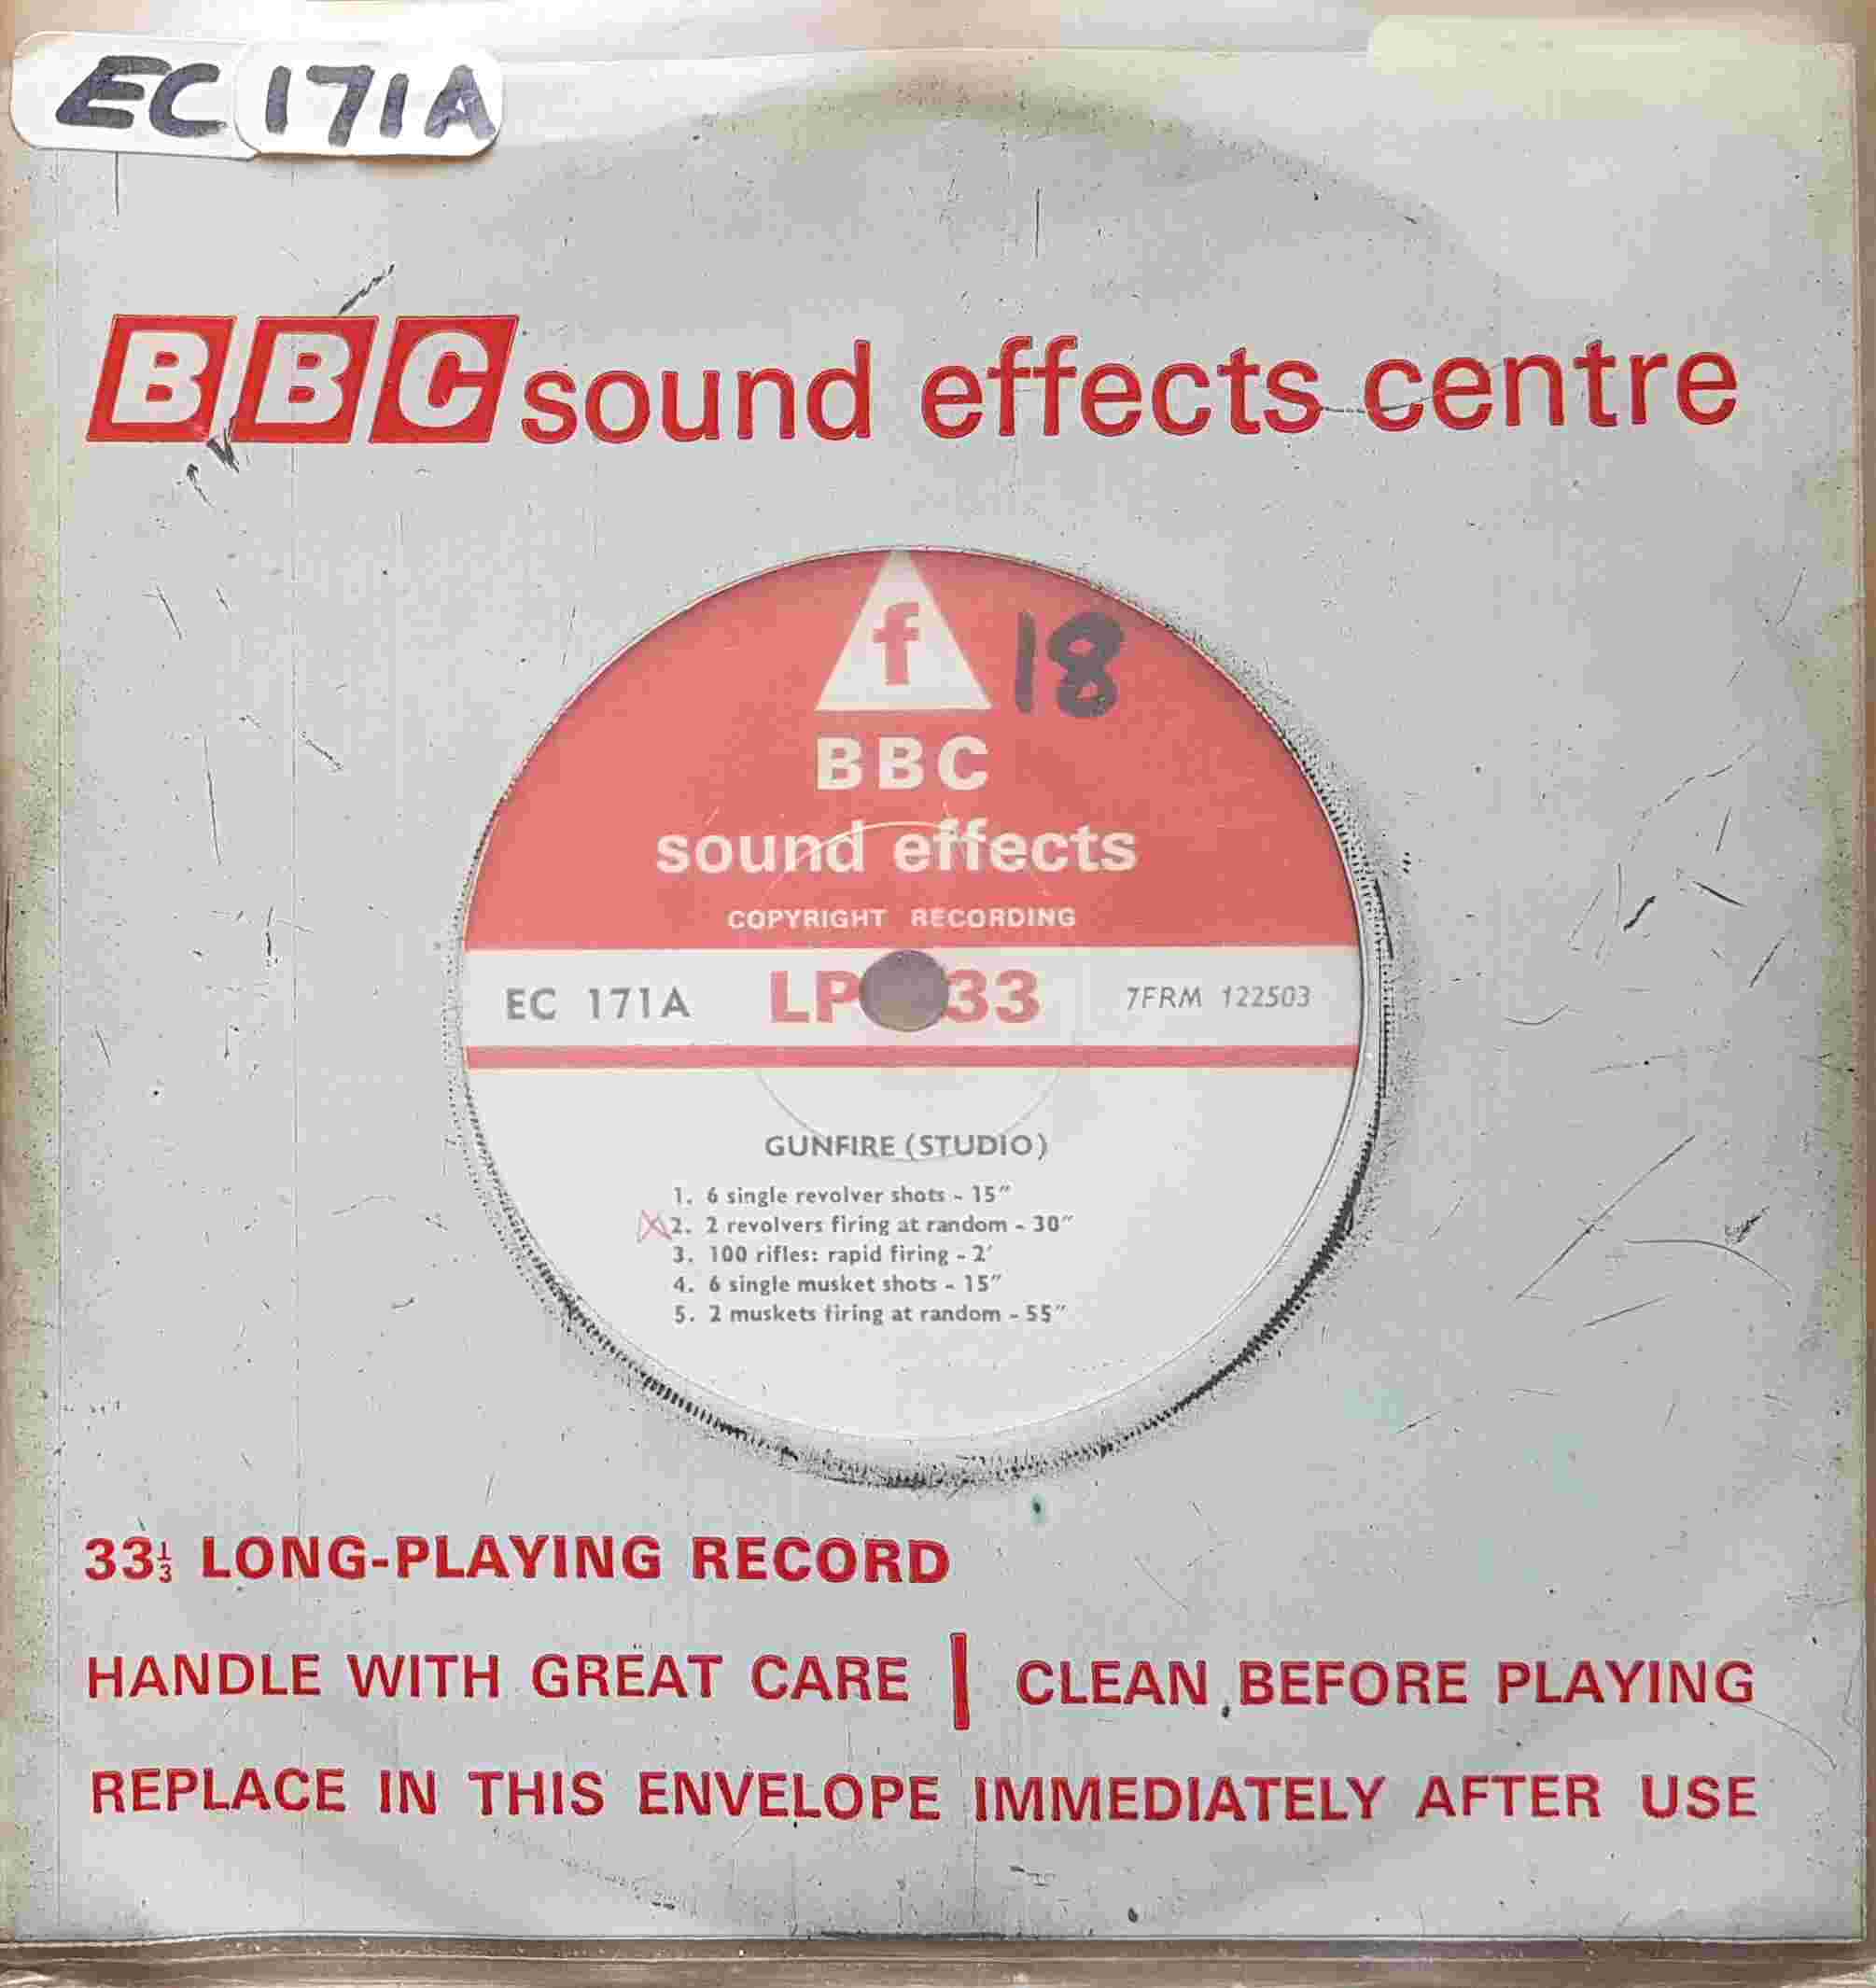 Picture of EC 171A Gunfire by artist Not registered from the BBC singles - Records and Tapes library